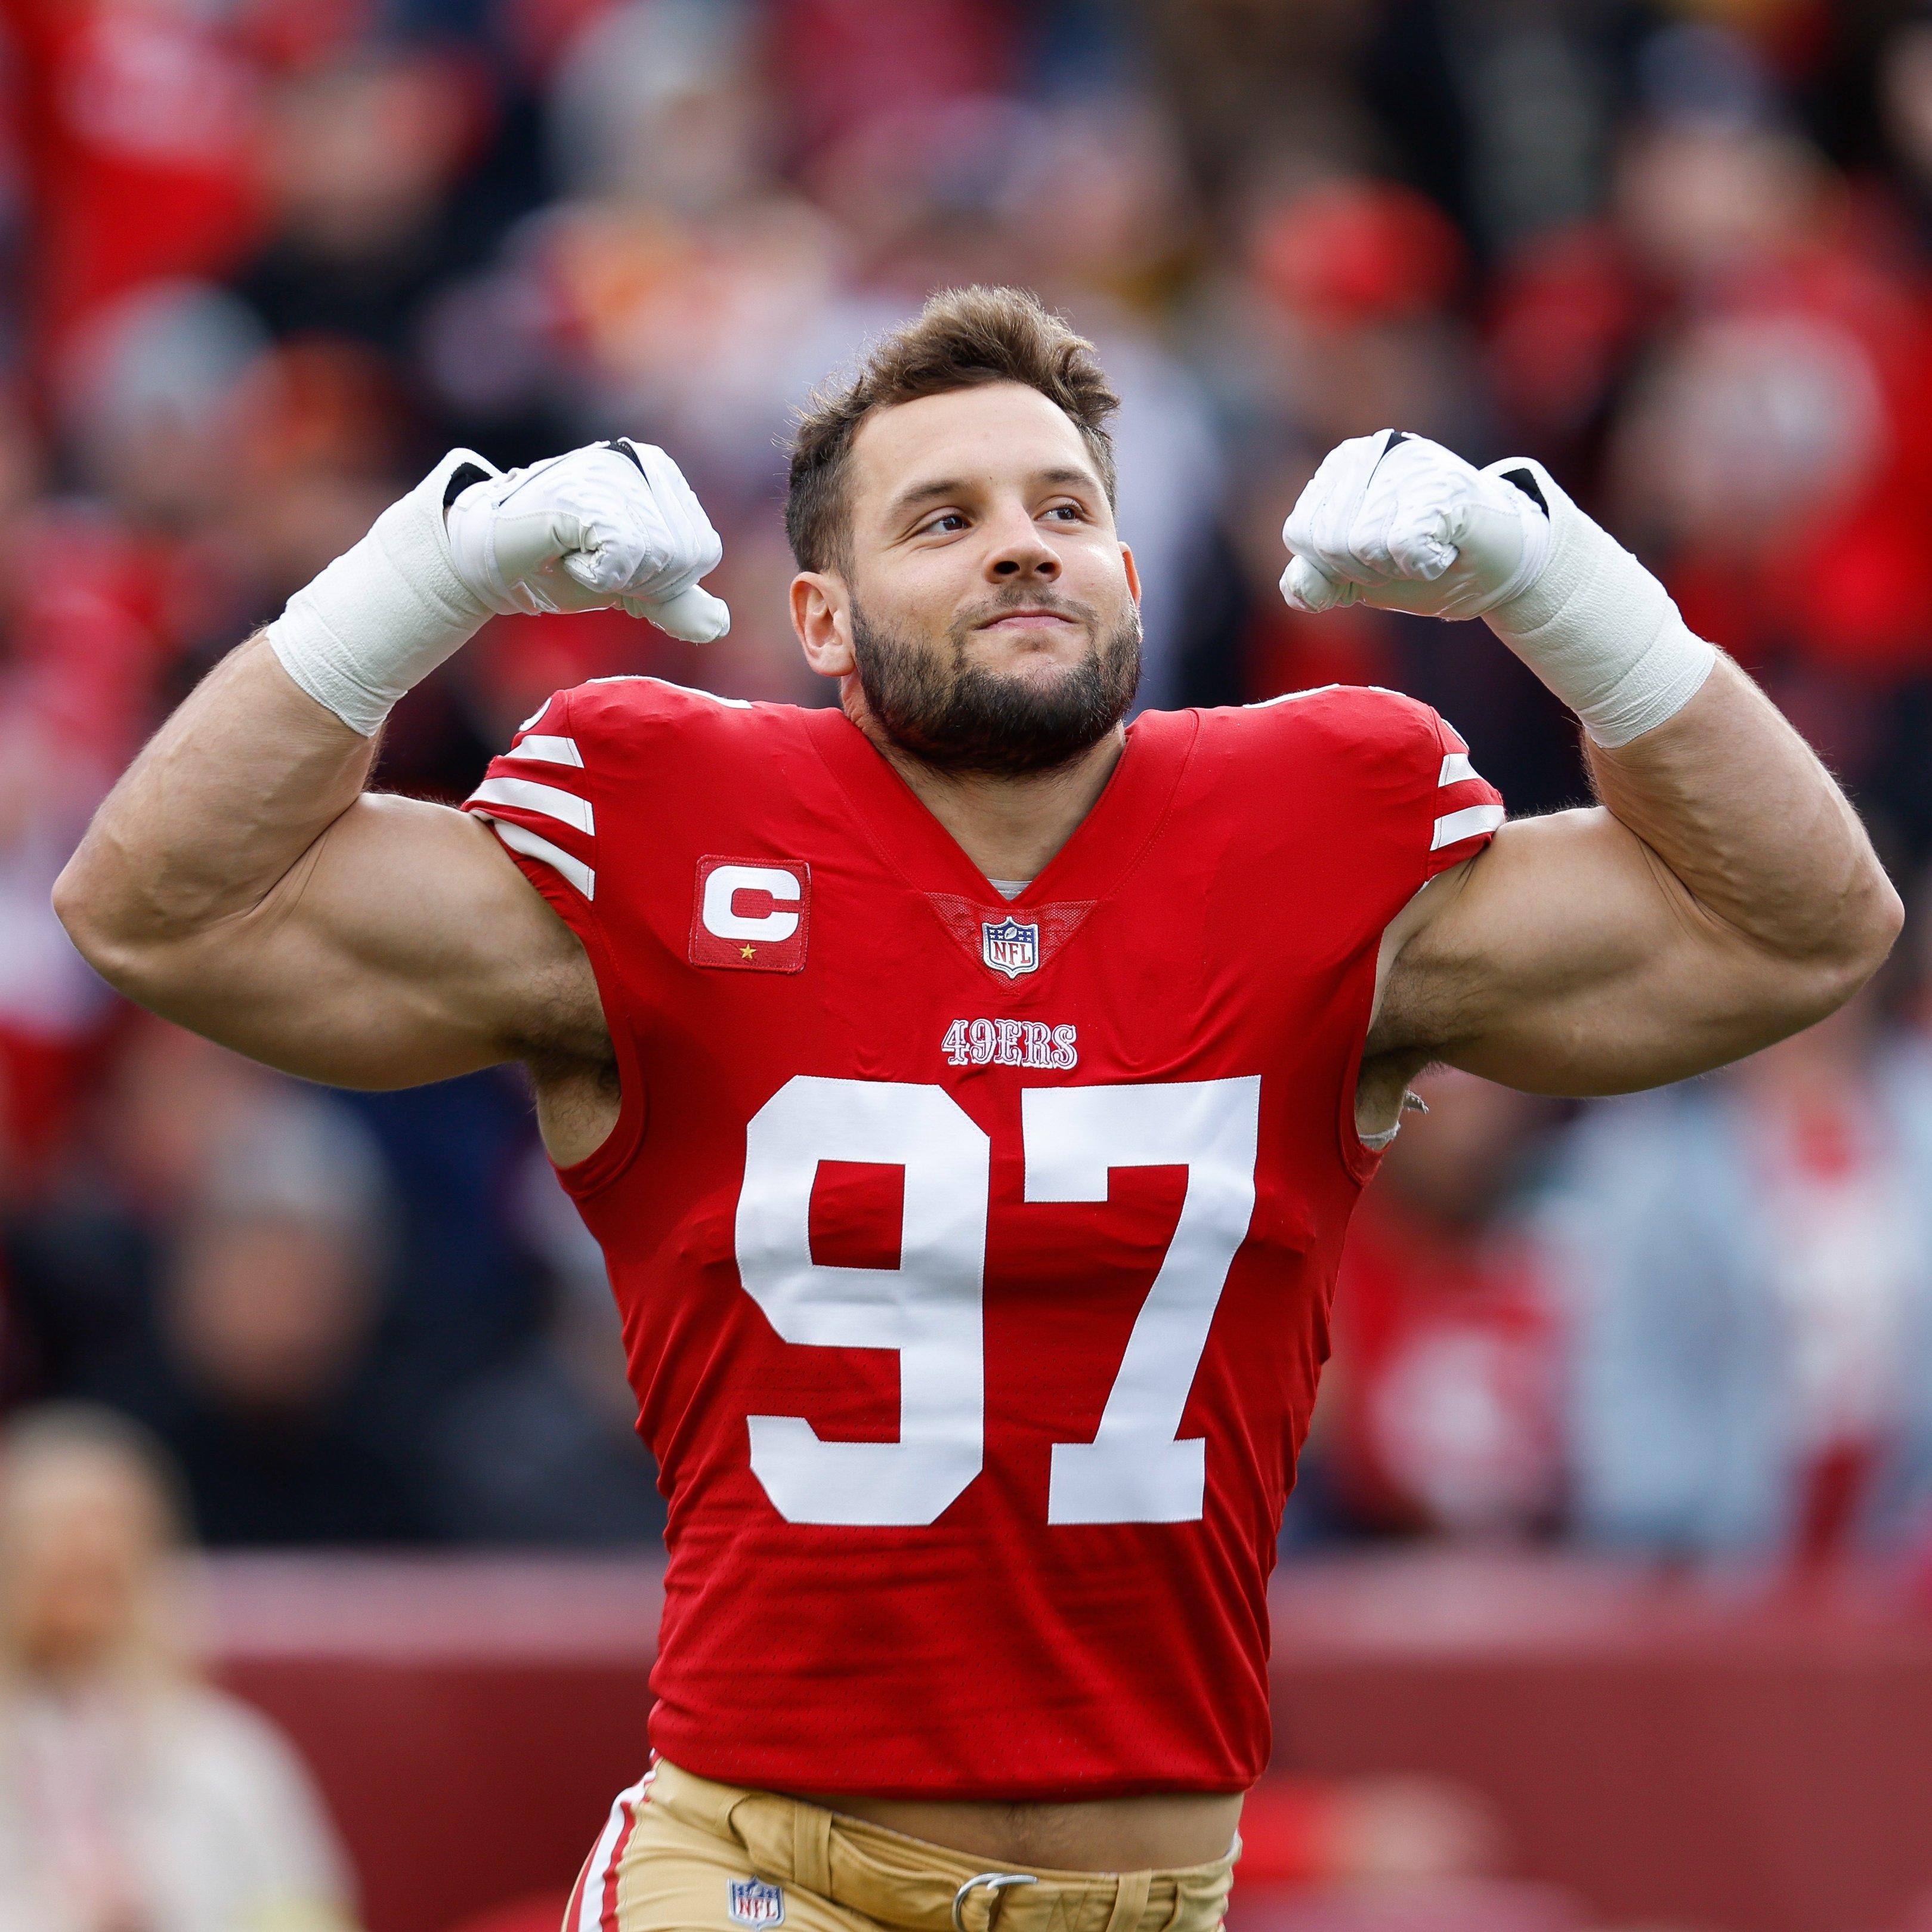 afhængige absolutte tildeling NFL UK on Twitter: "Nick Bosa in 2022: ▪️ 18.5 sacks (most in NFL) ▪️ 19  tackles for loss ▪️ 51 total tackles ▪️ 2 forced fumbles ▪️ Defensive  Player of the